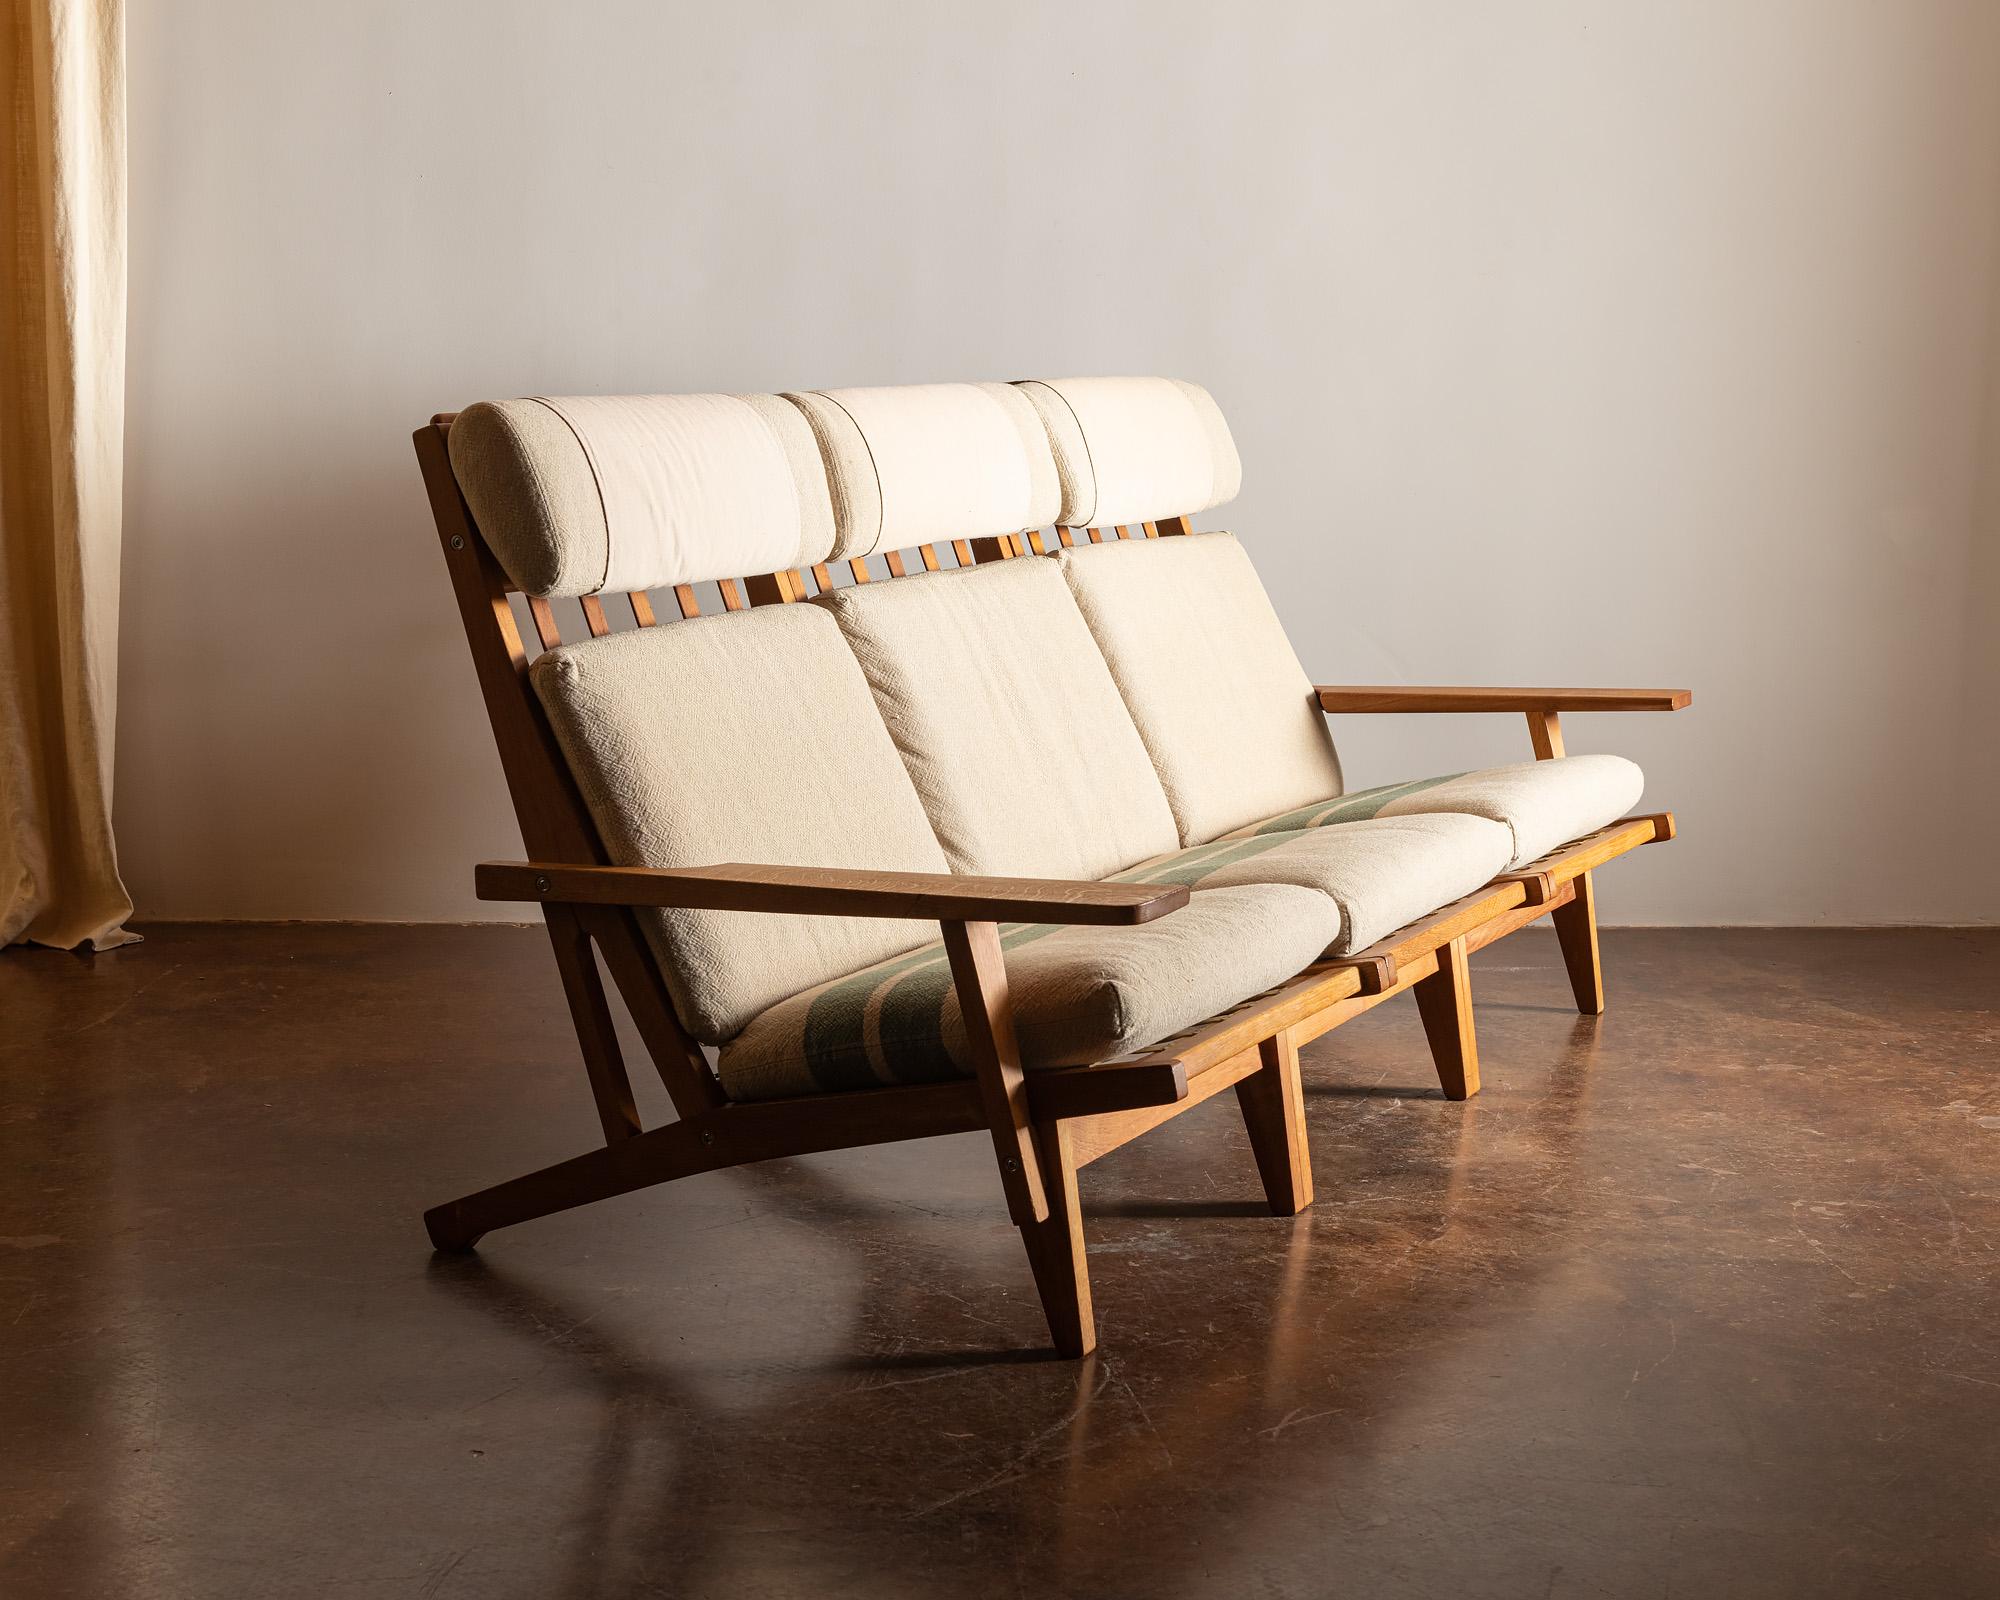 A Classic Wegner GE 375 three-seat in original cotton fabric. Manufactured by Getama, Denmark, 1960s.

The three chairs are separate and can be secured together by the original steel clamps which are visible in the 15th image.